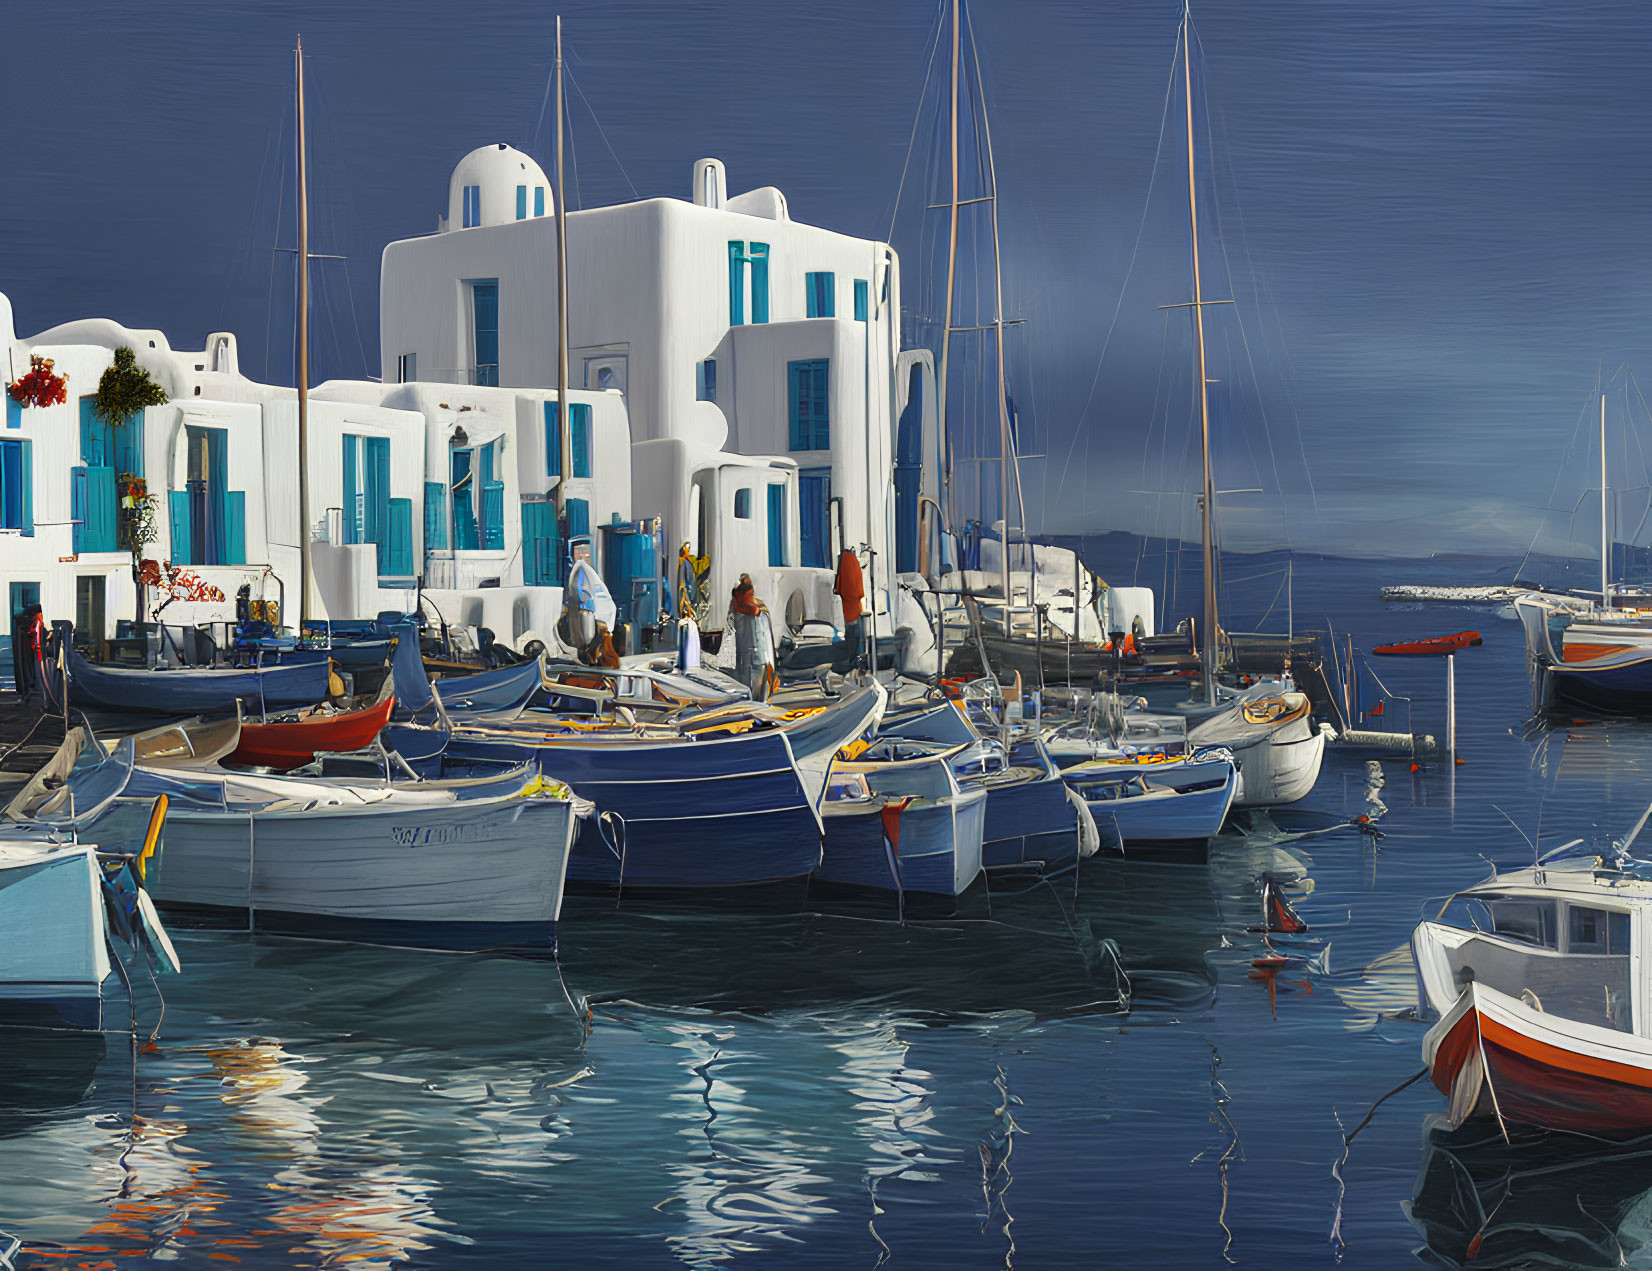 Boats Moored in Serene Harbor with White Buildings and Blue Sky